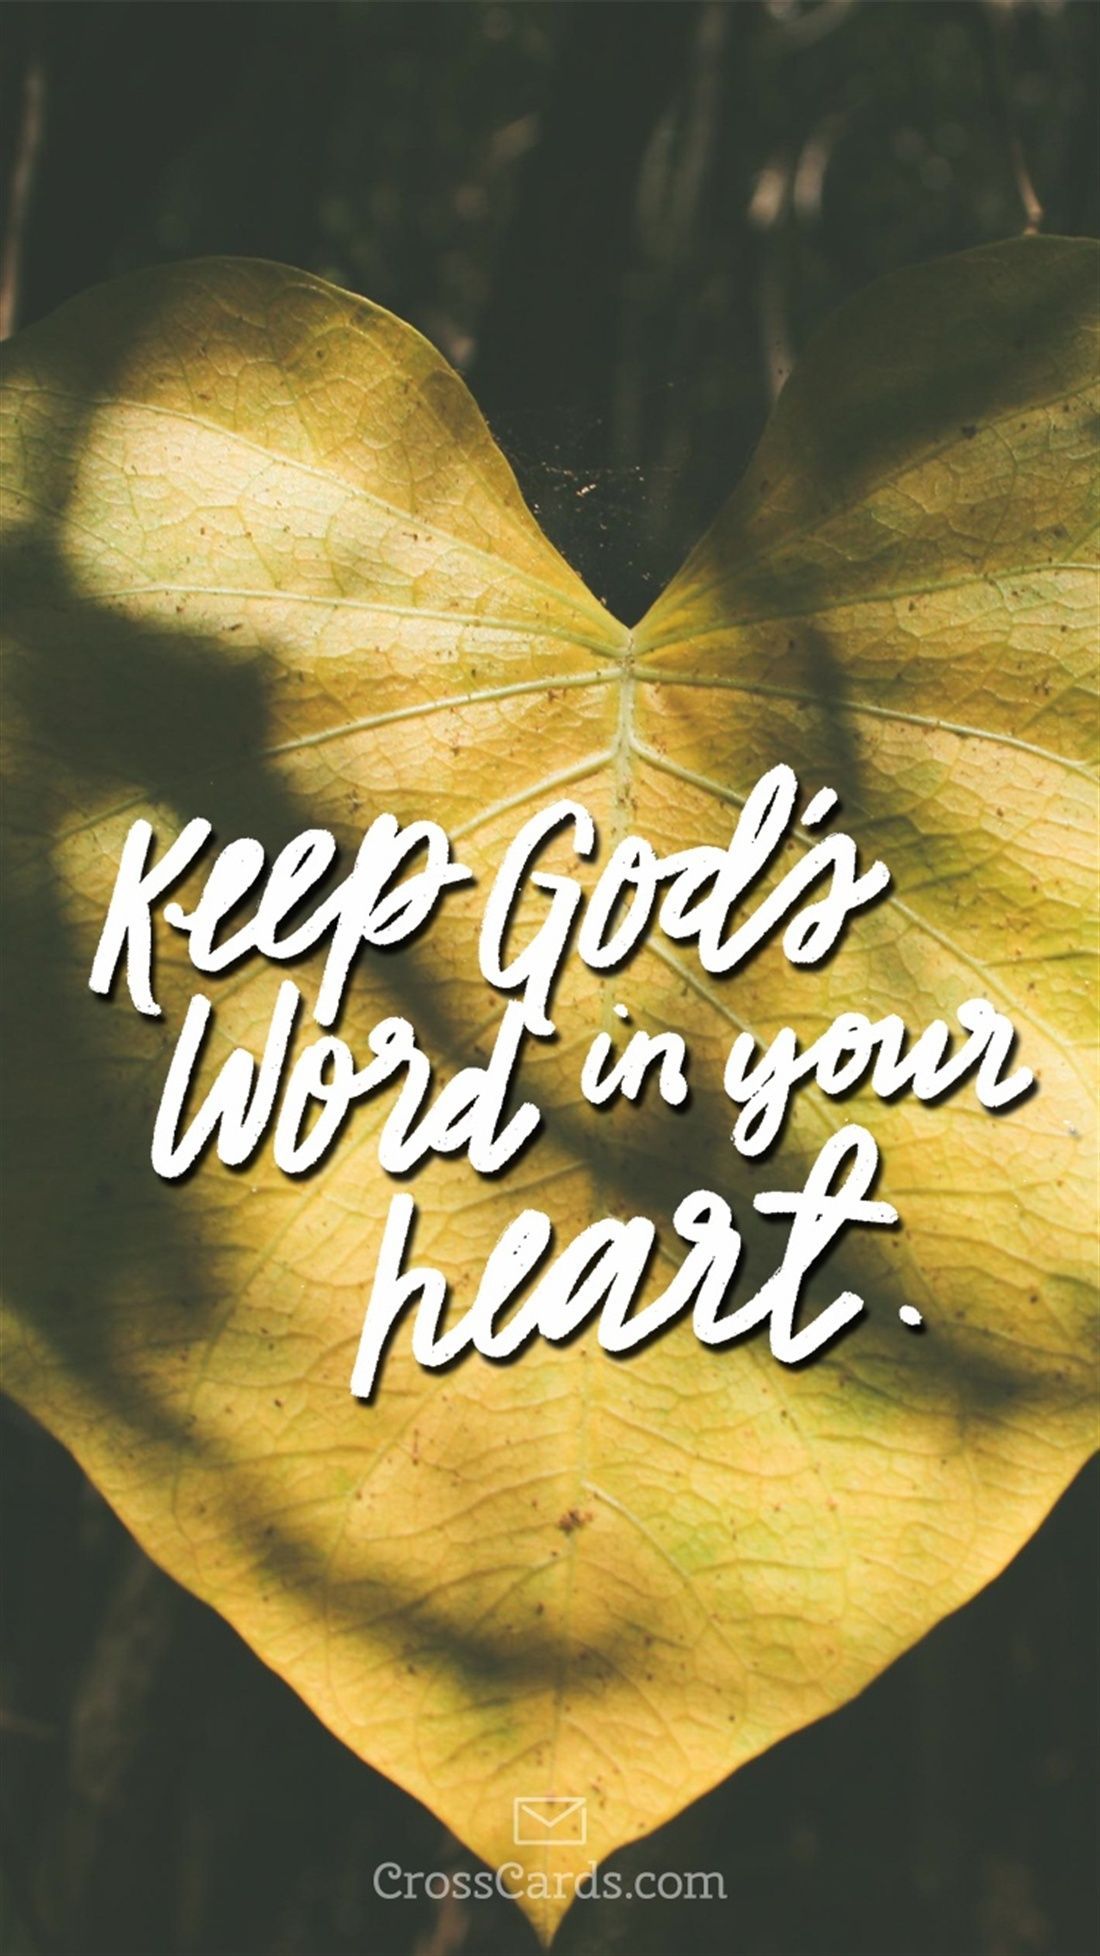 Keep God's Word in Your Heart Phone Wallpaper. S word, Words, God